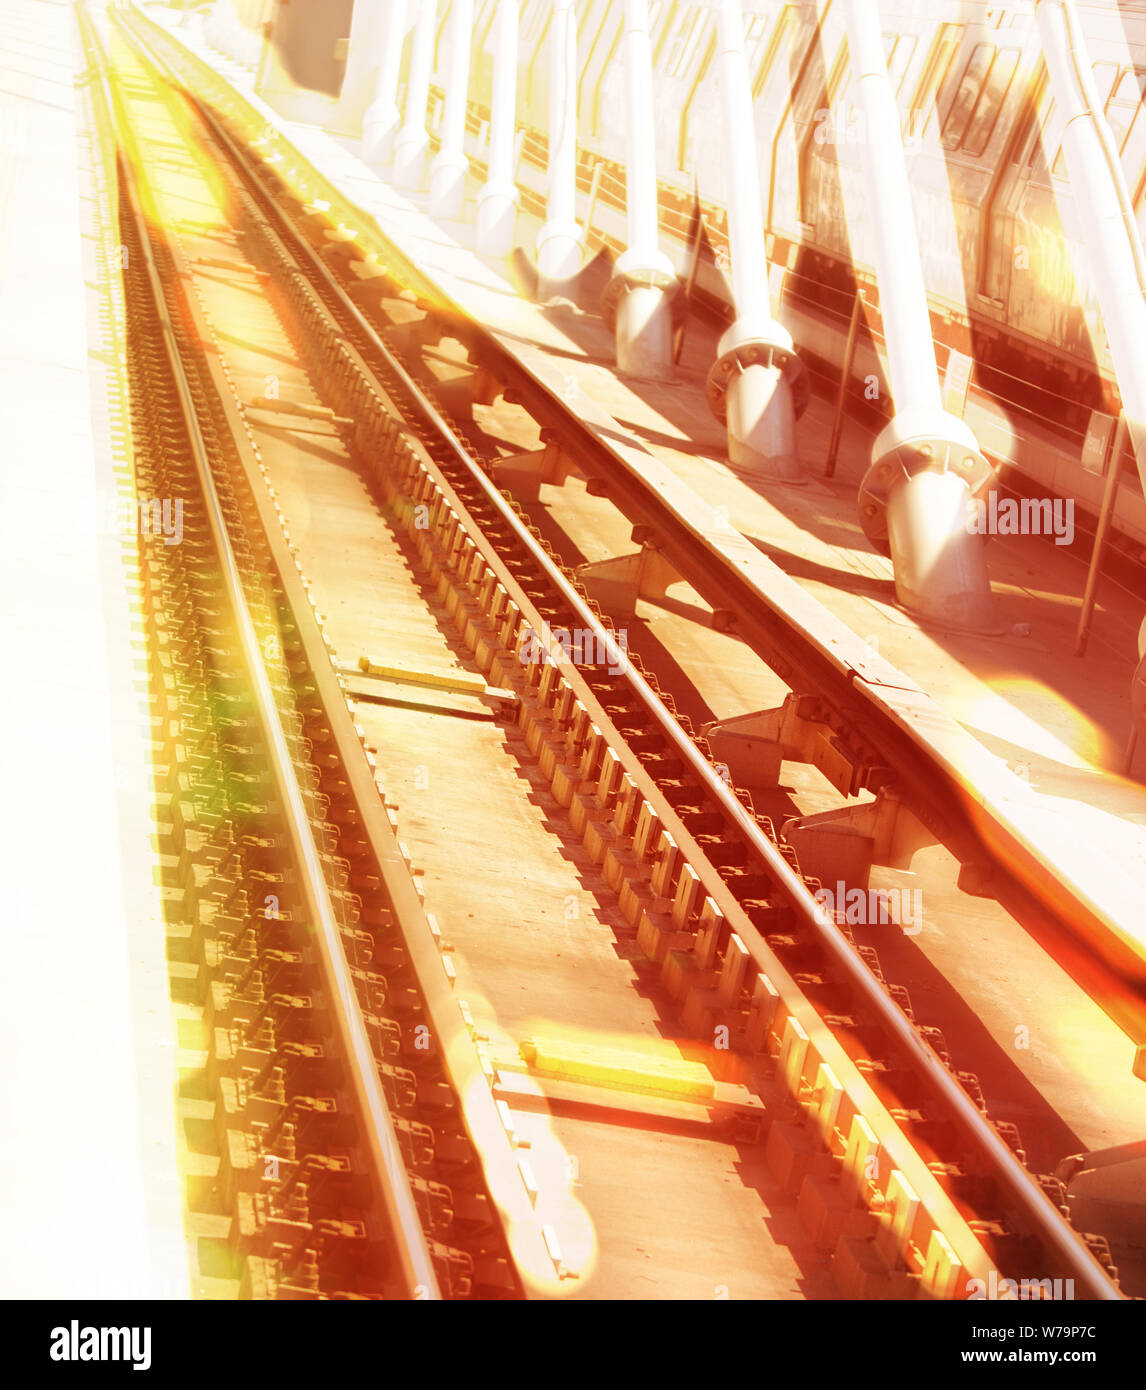 Single point perspective image of a burning metro rails and suspenders of a bridge in a dizzy look. Global warming and heatwave concepts. Stock Photo